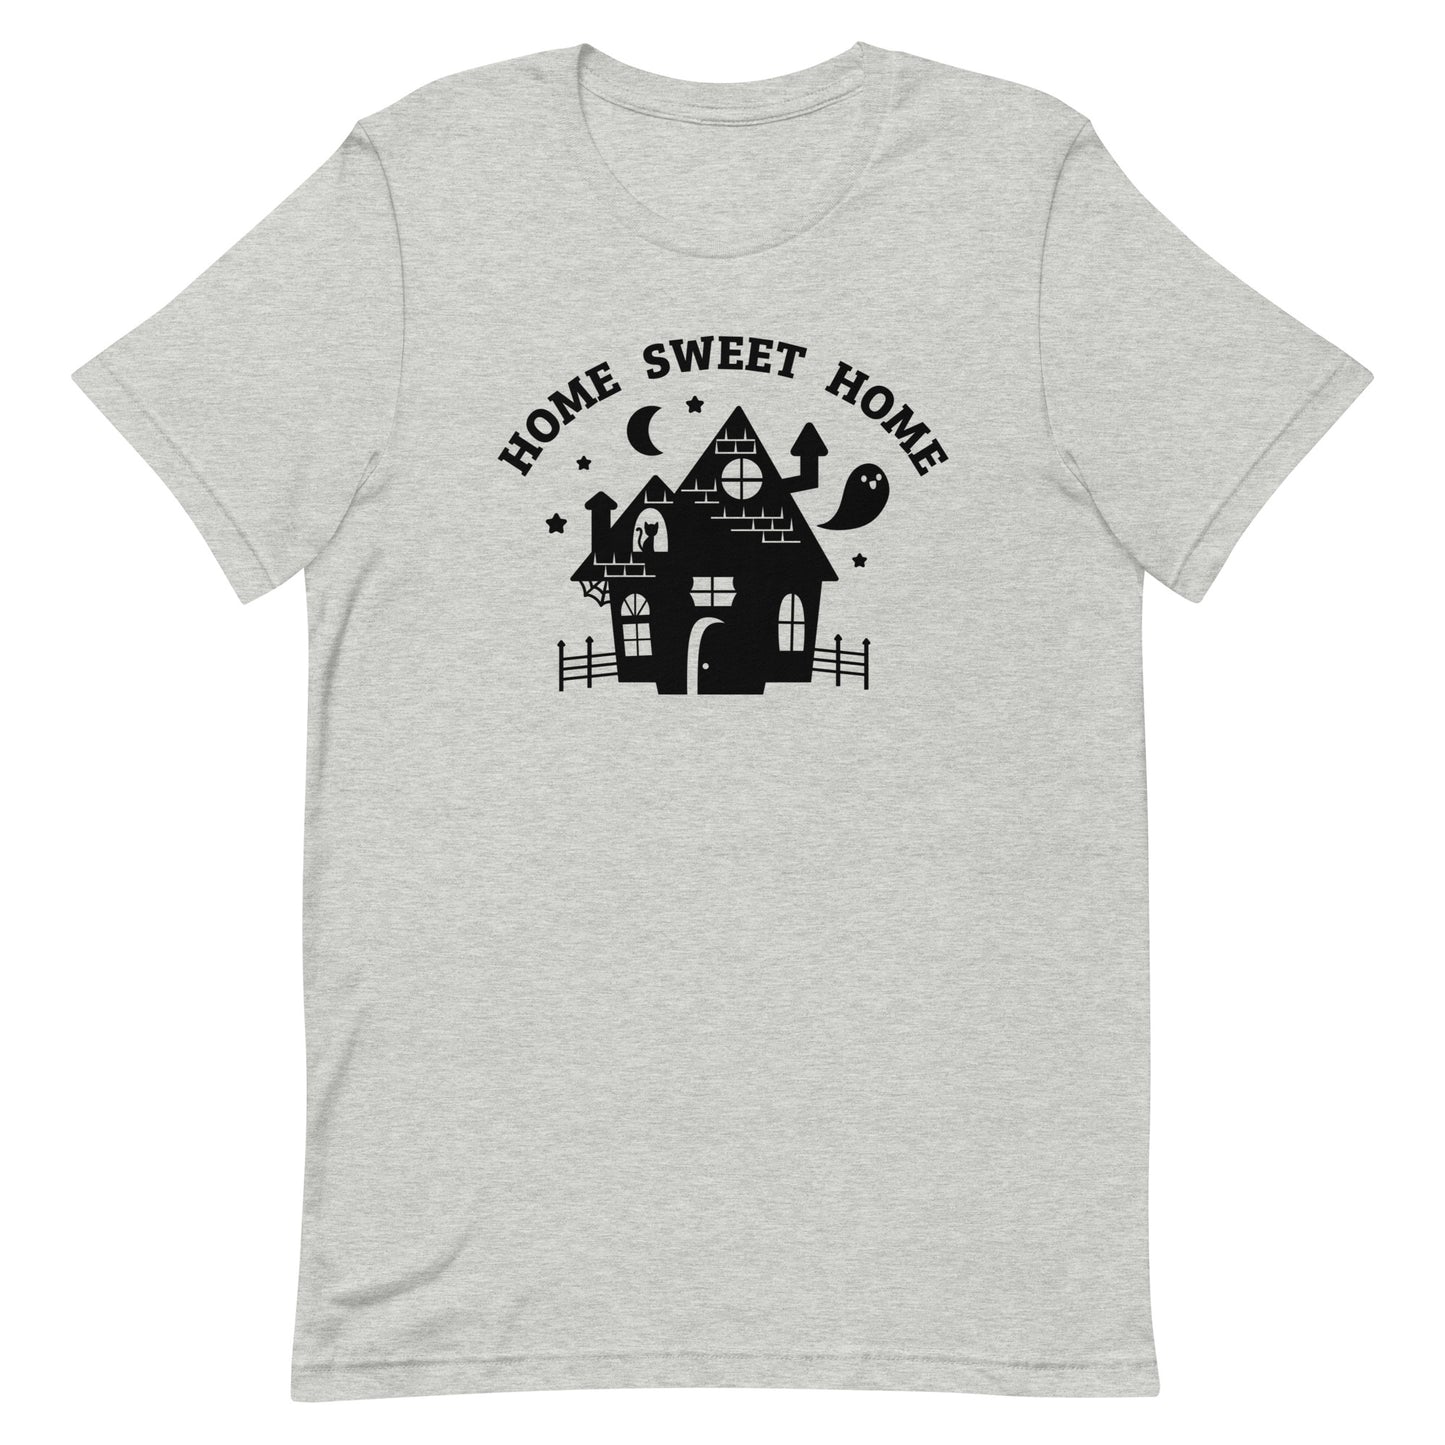 A grey crewneck t-shirt featuring a single-color illustration of a haunted house. Text above the house reads "HOME SWEET HOME".